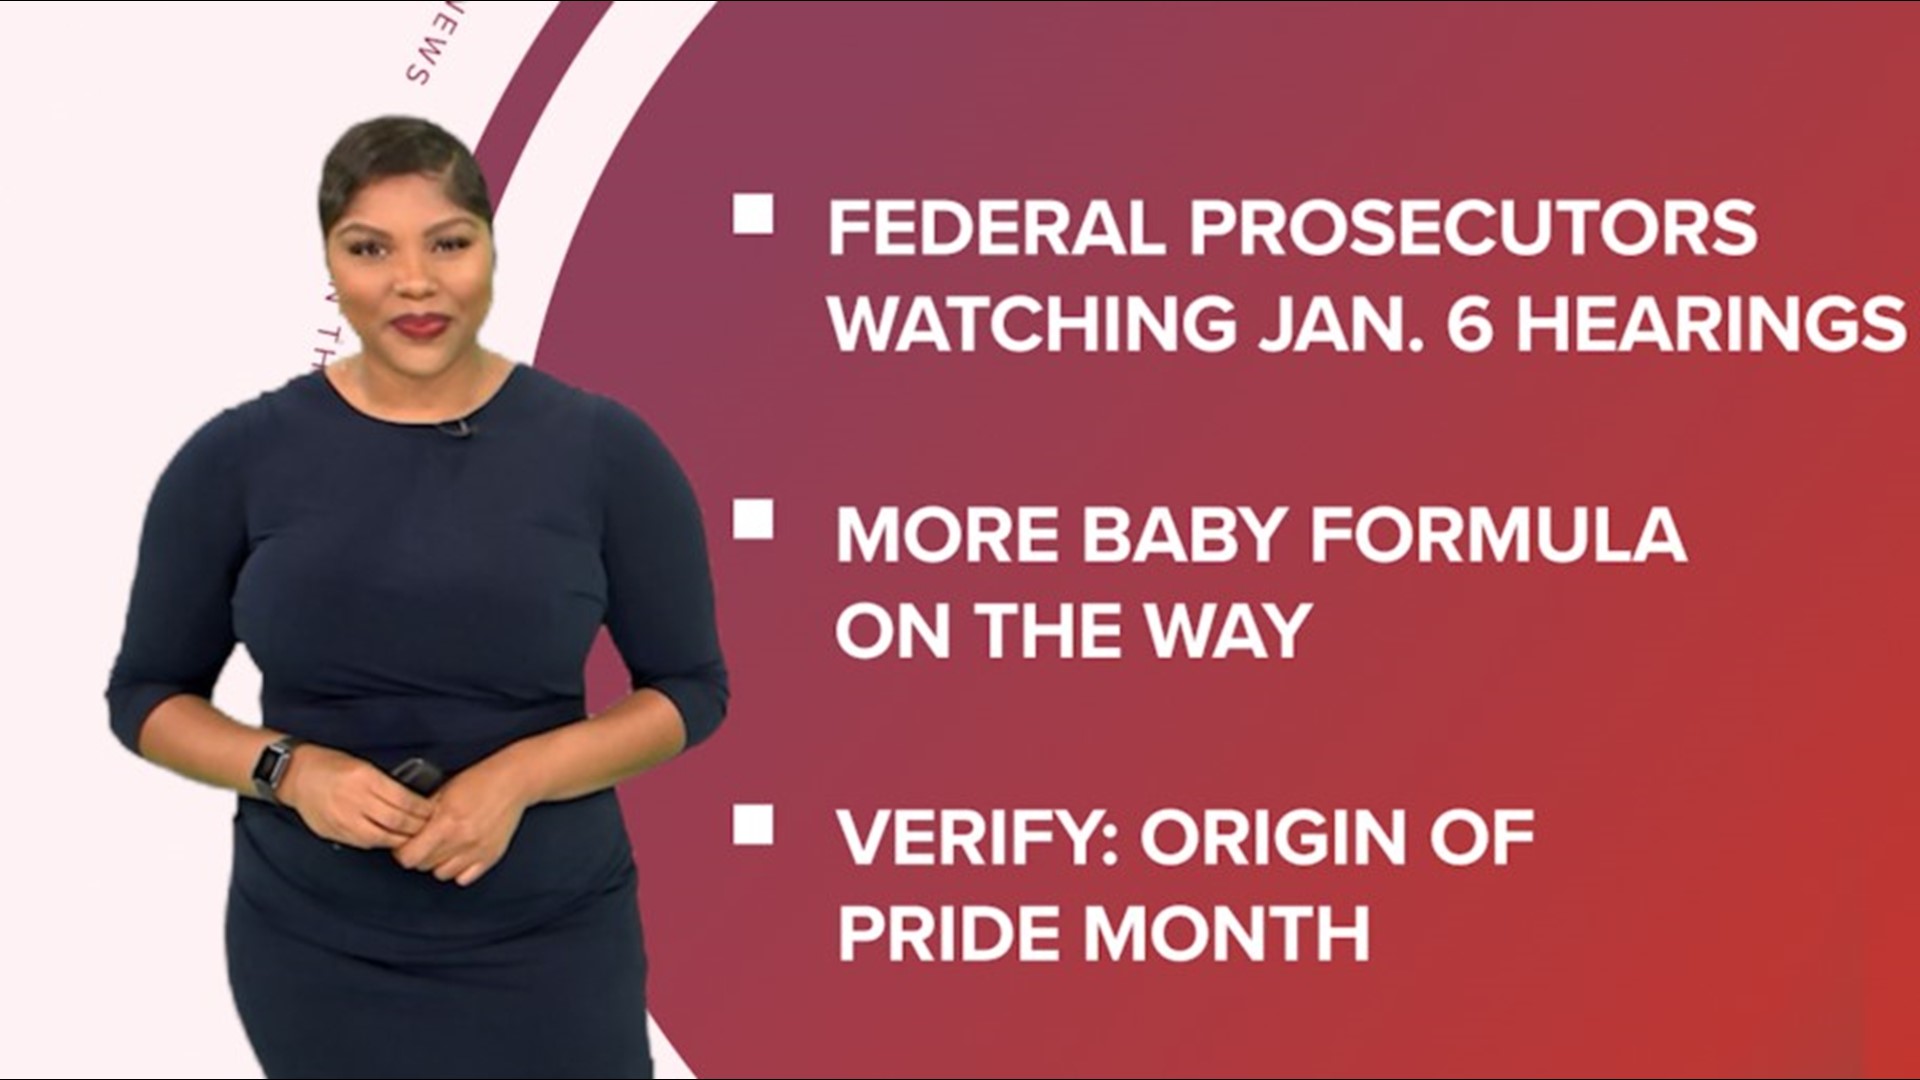 A look at what is happening in the U.S. from the latest on the Jan. 6 hearings, more baby formula on the way and a chance to see the strawberry super moon.